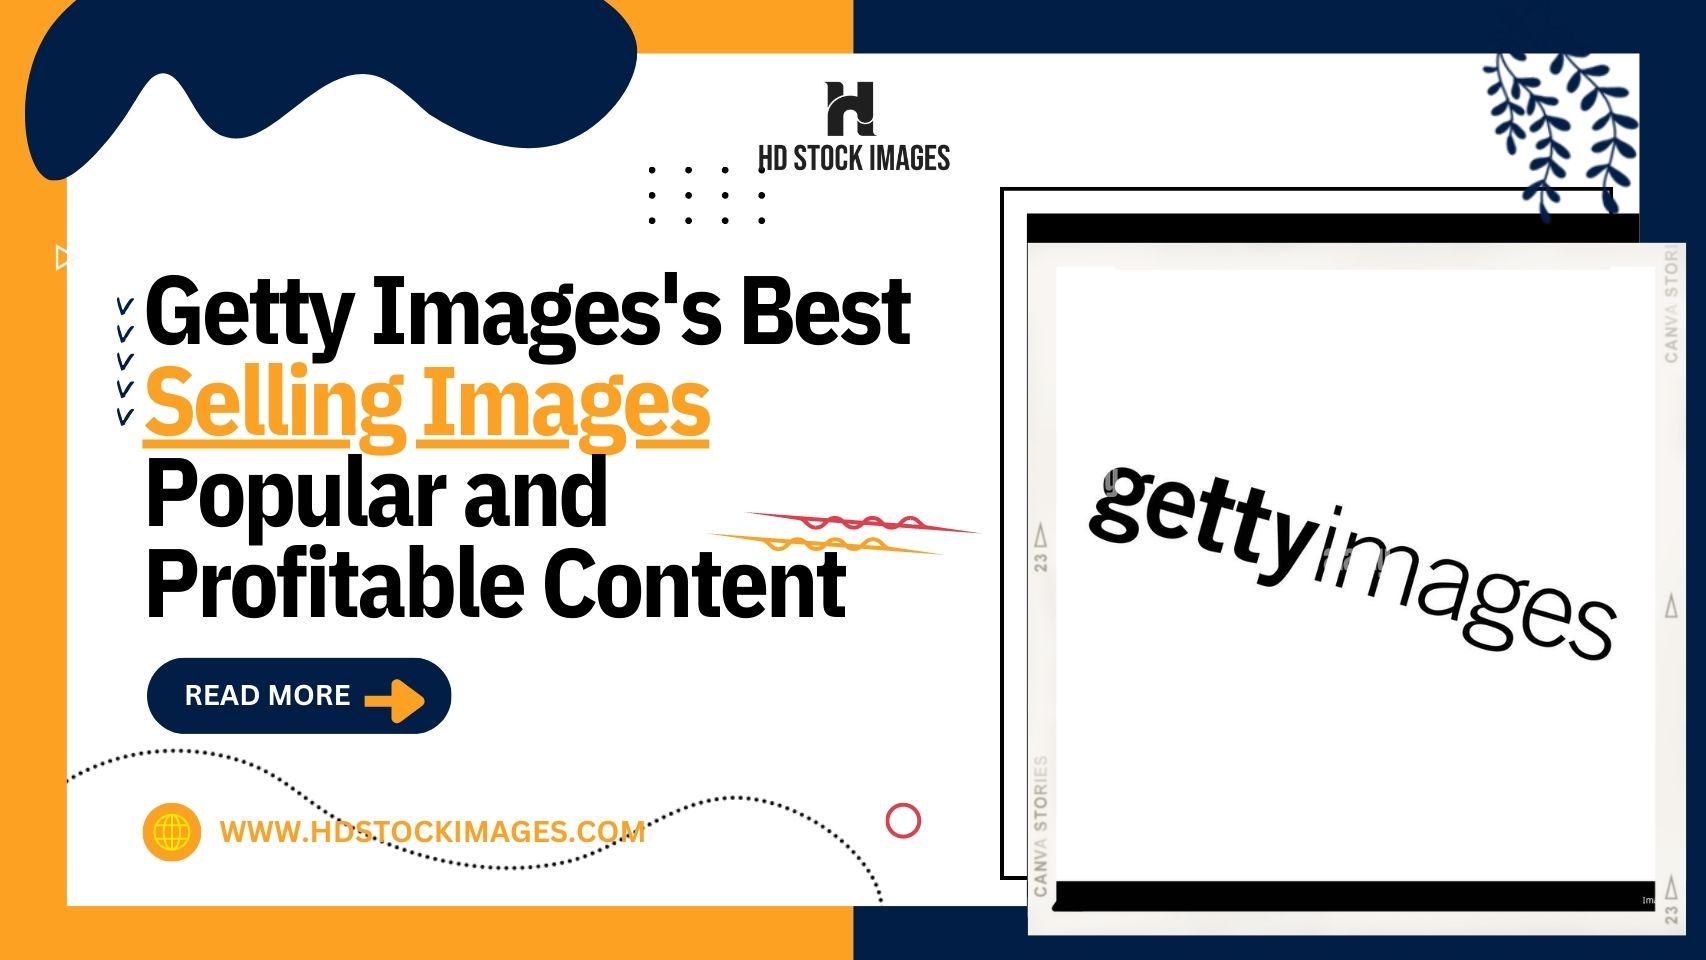 an image of Insights into Popular and Profitable Content: Getty Images's Best Selling Images